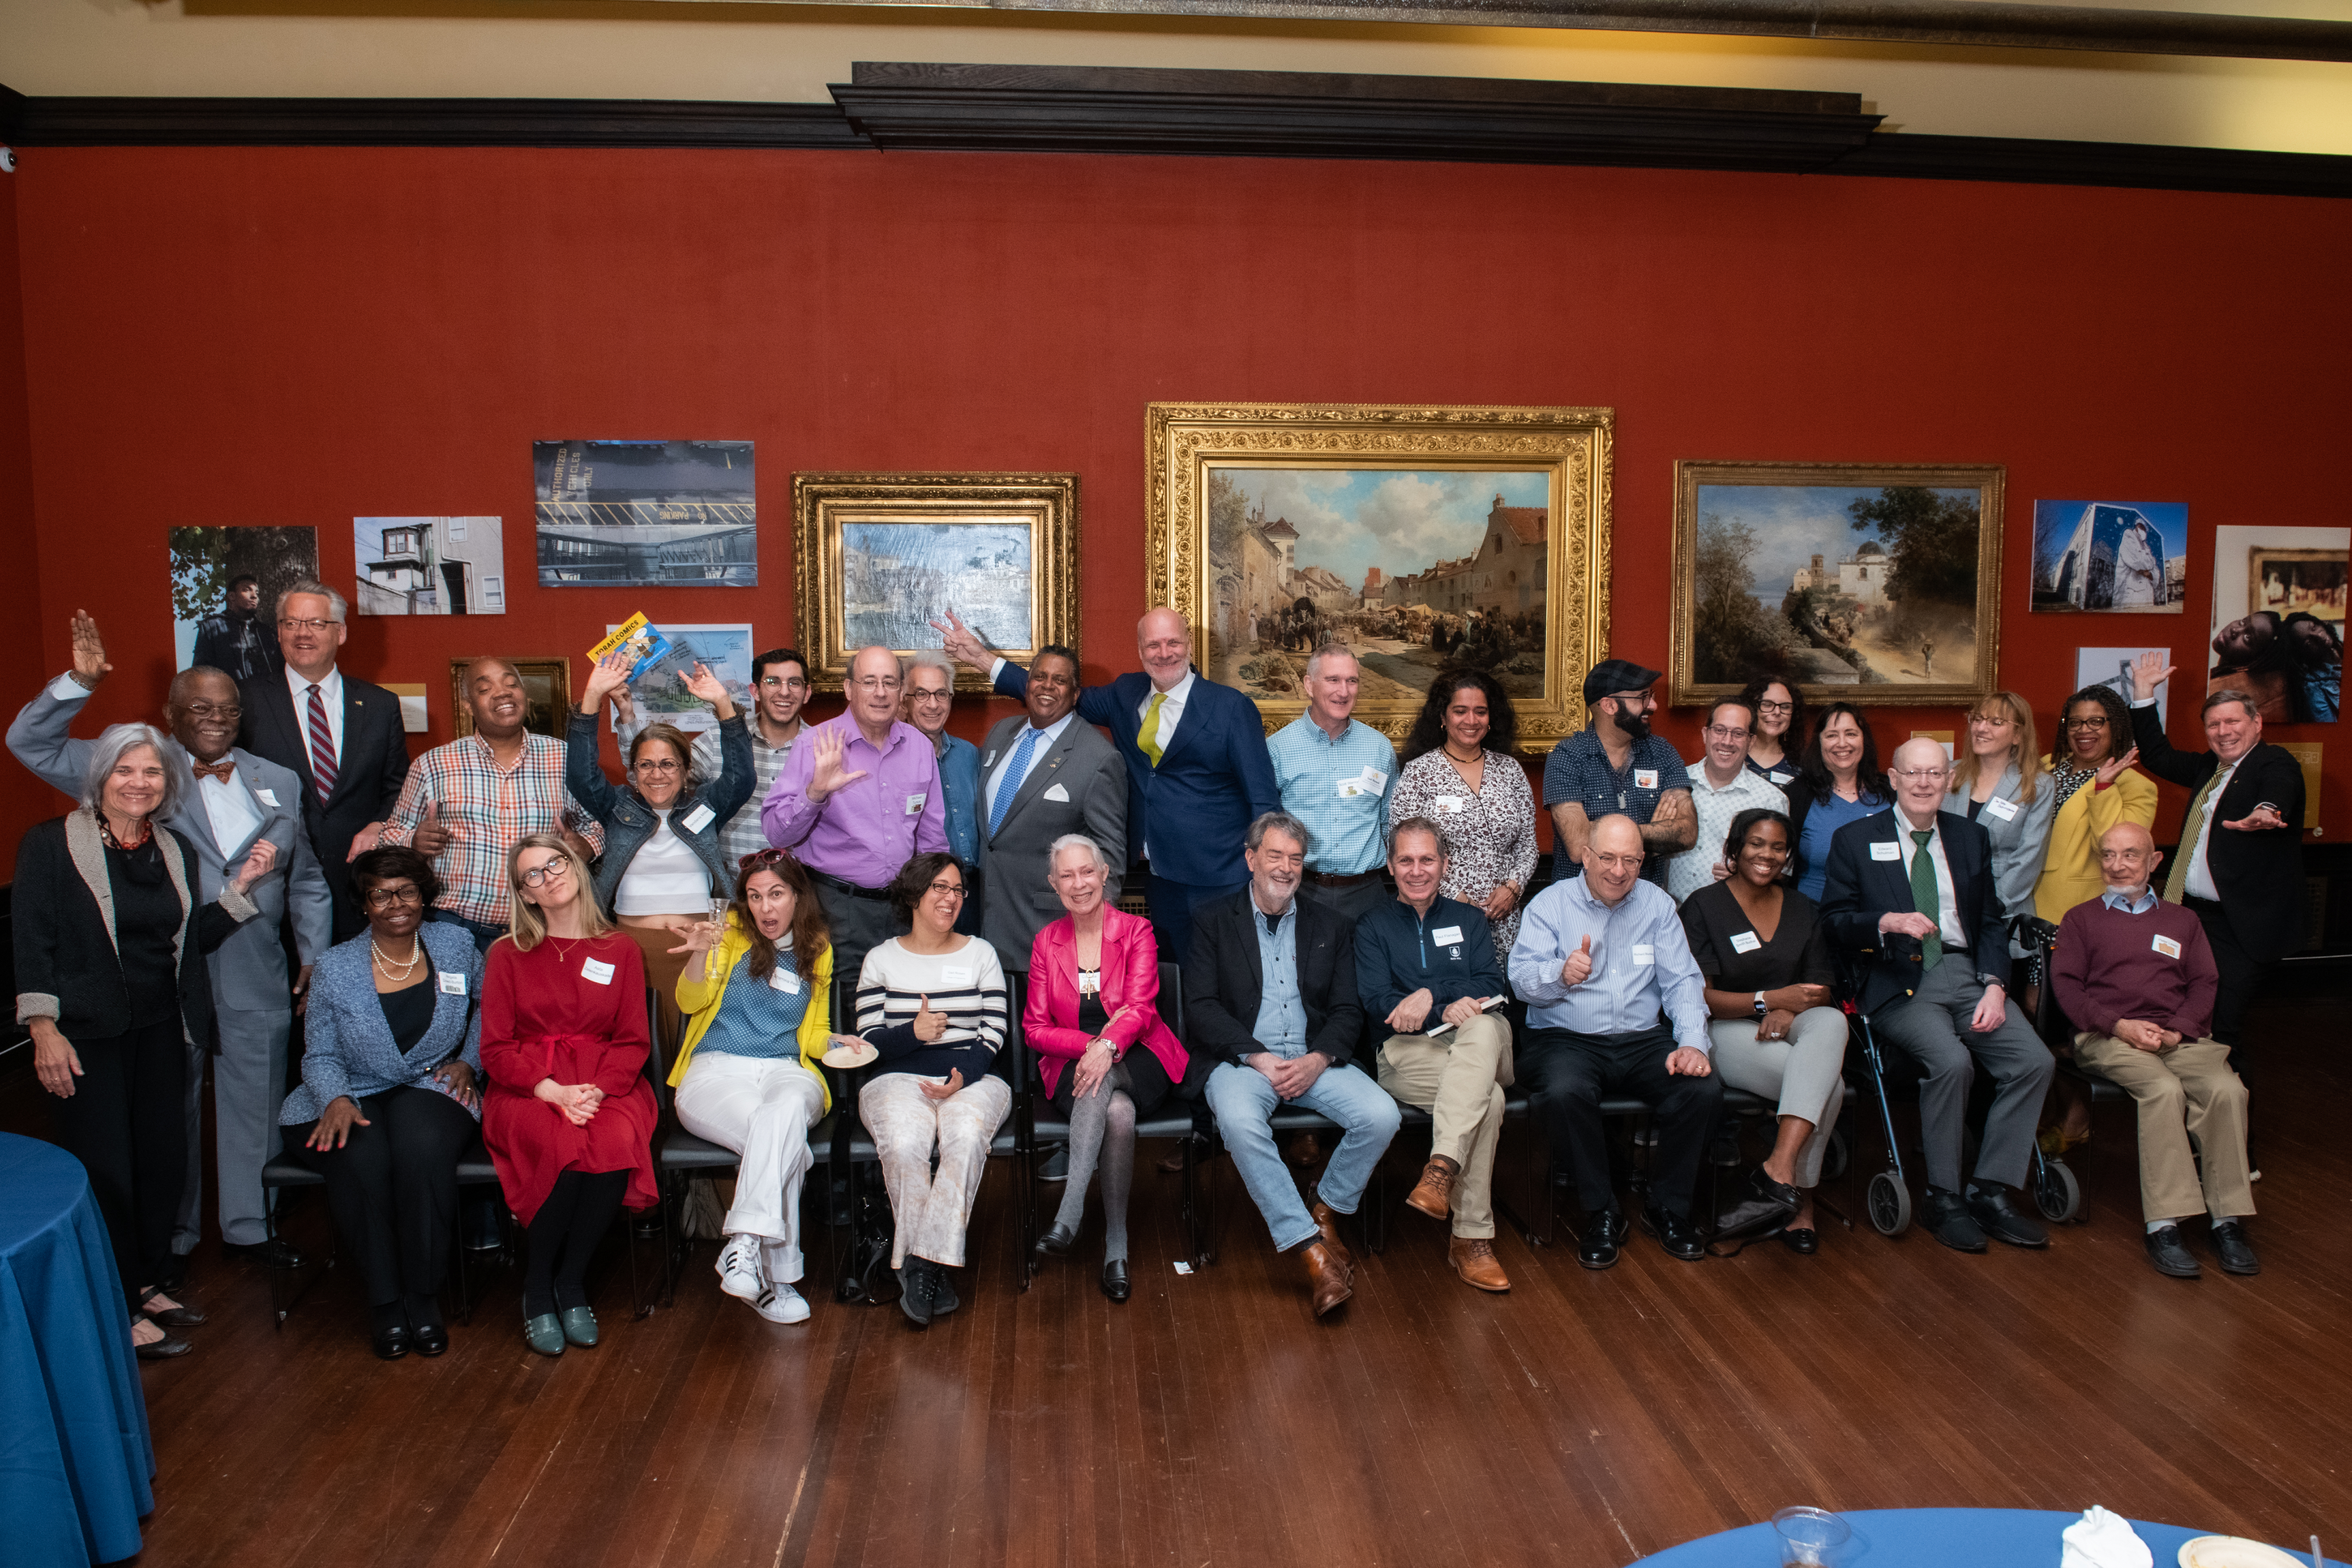 Drexel authors pose for a photo in the AJ Drexel Picture Gallery